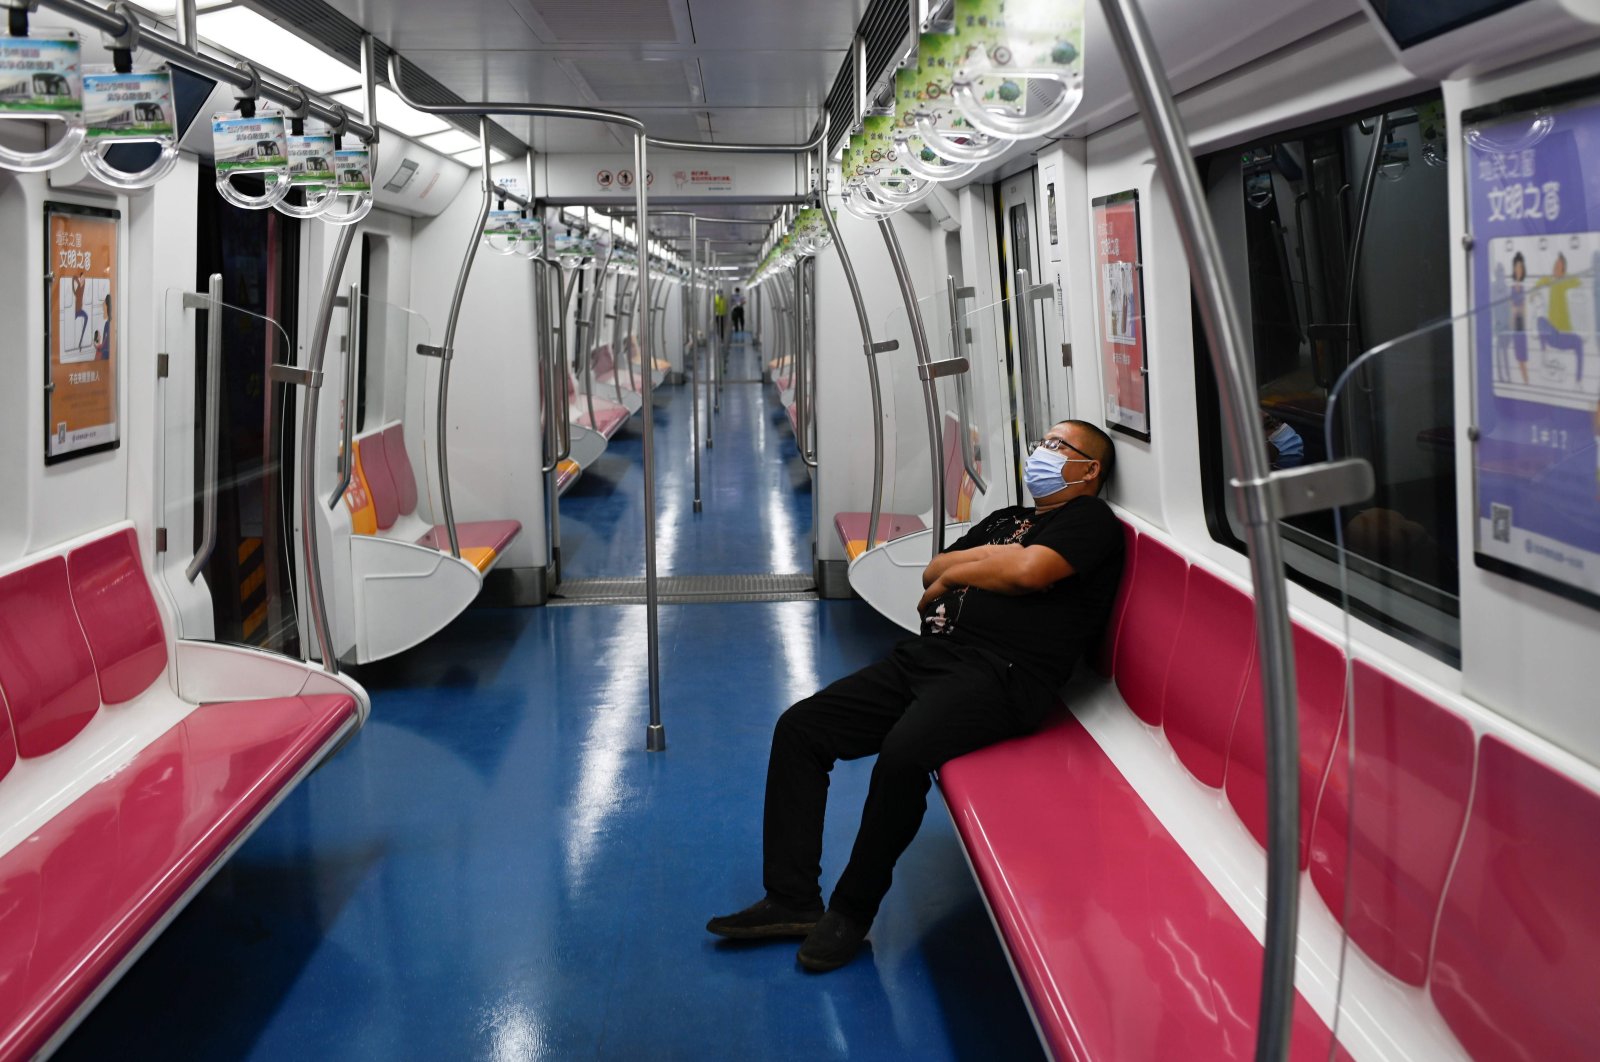 A man wearing a face mask sits on a subway train in Beijing on June 20, 2020 (AFP Photo)